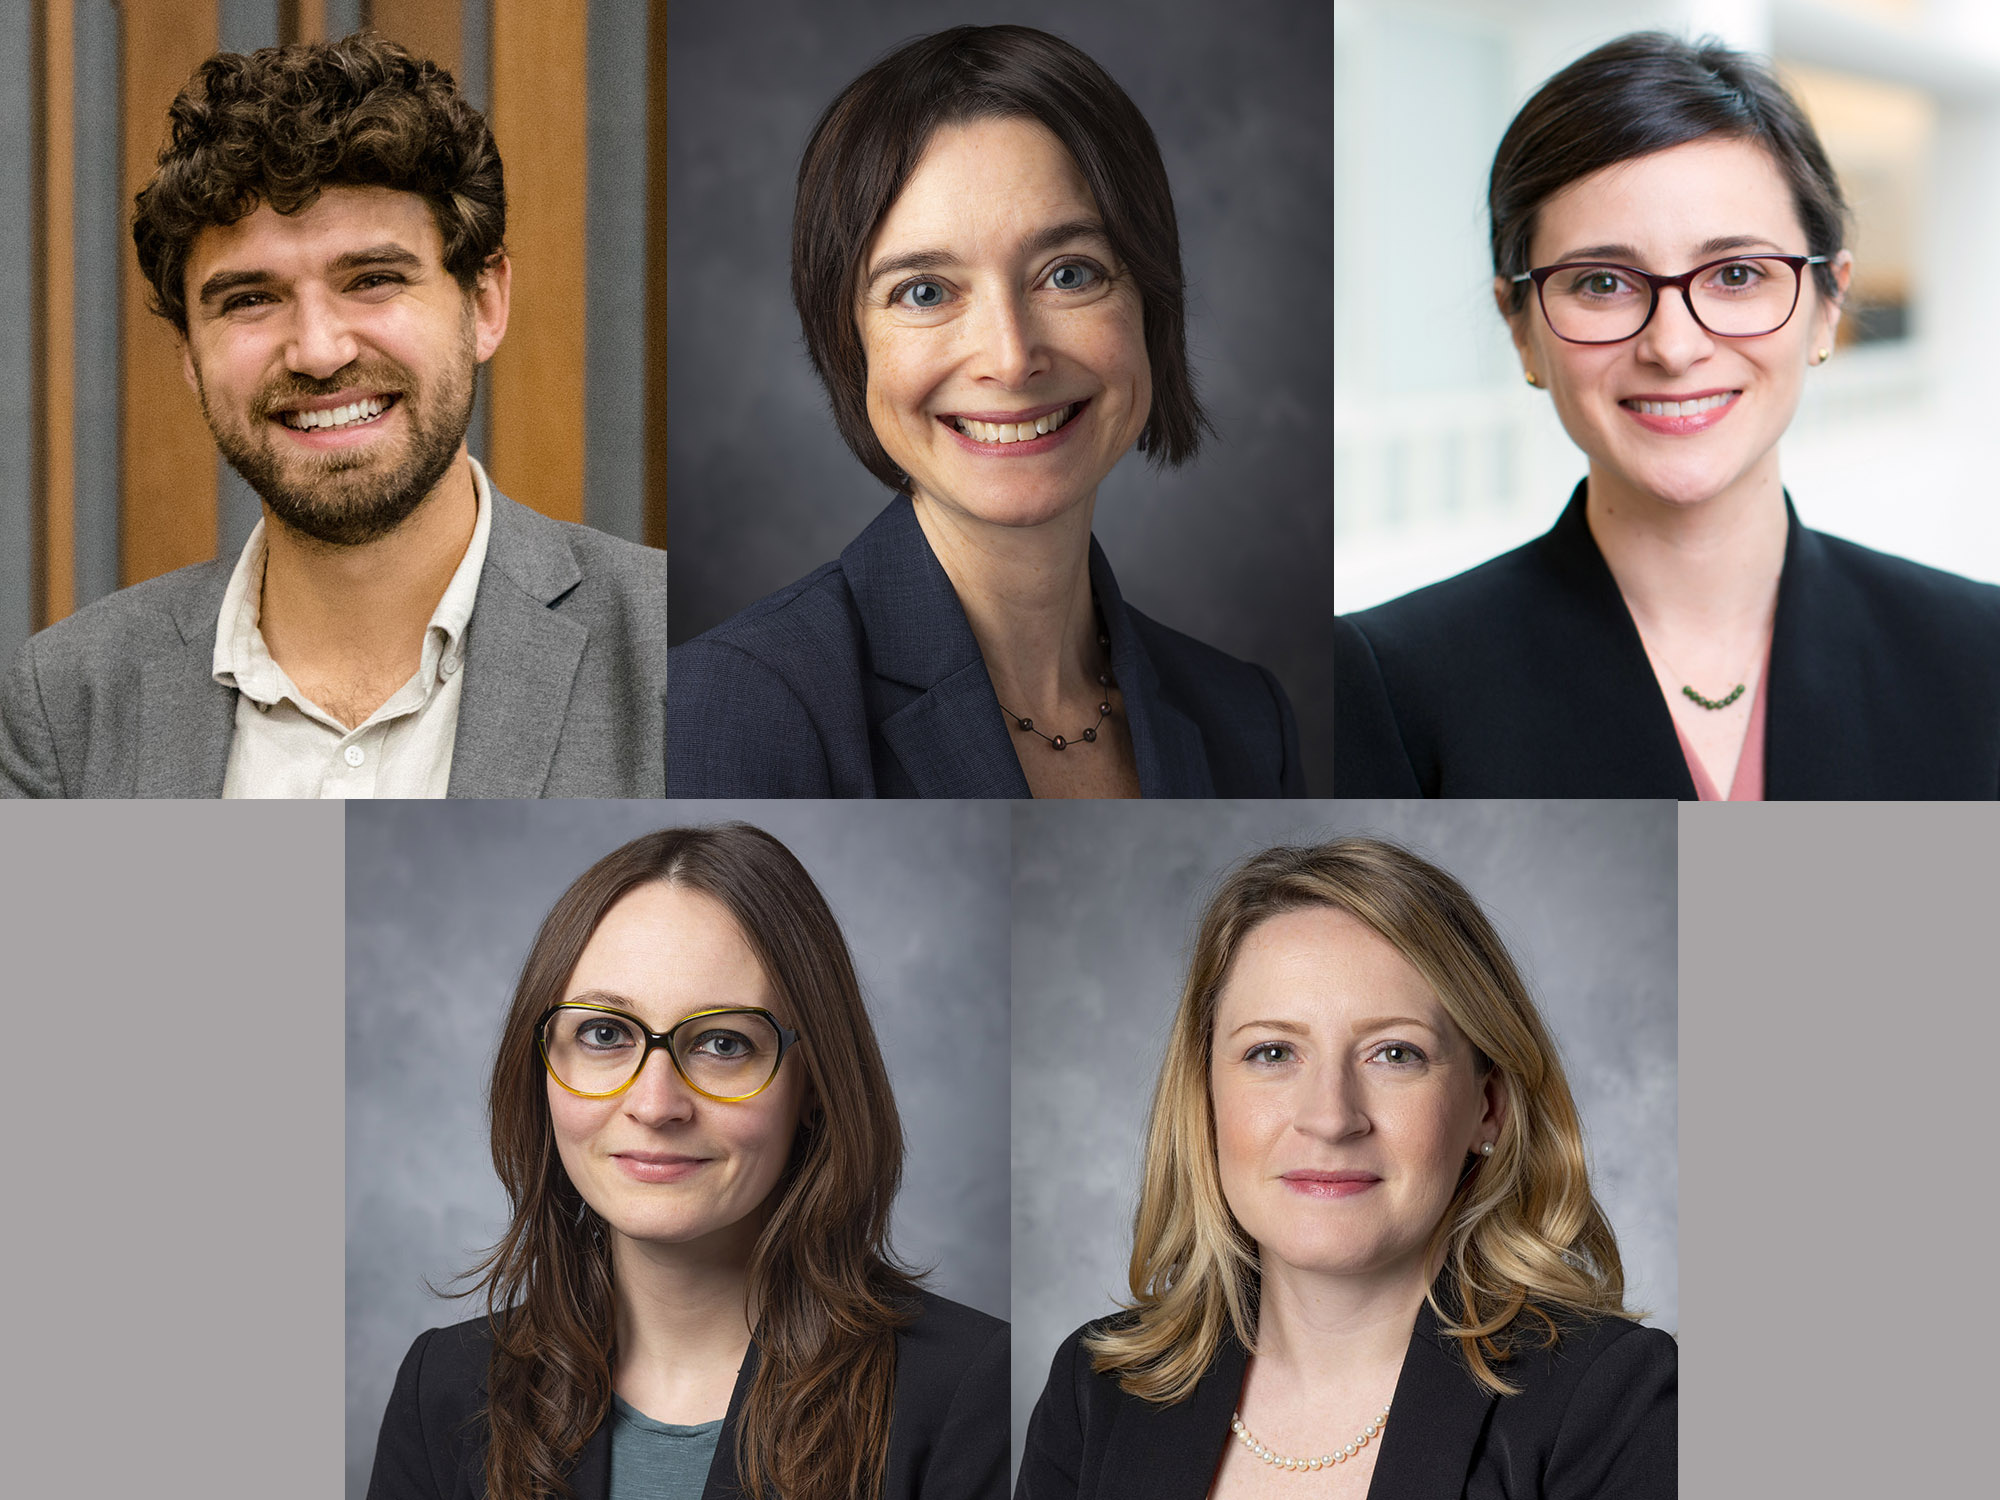 School welcomes five faculty, including hires from Yale Law School and Harvard Business School